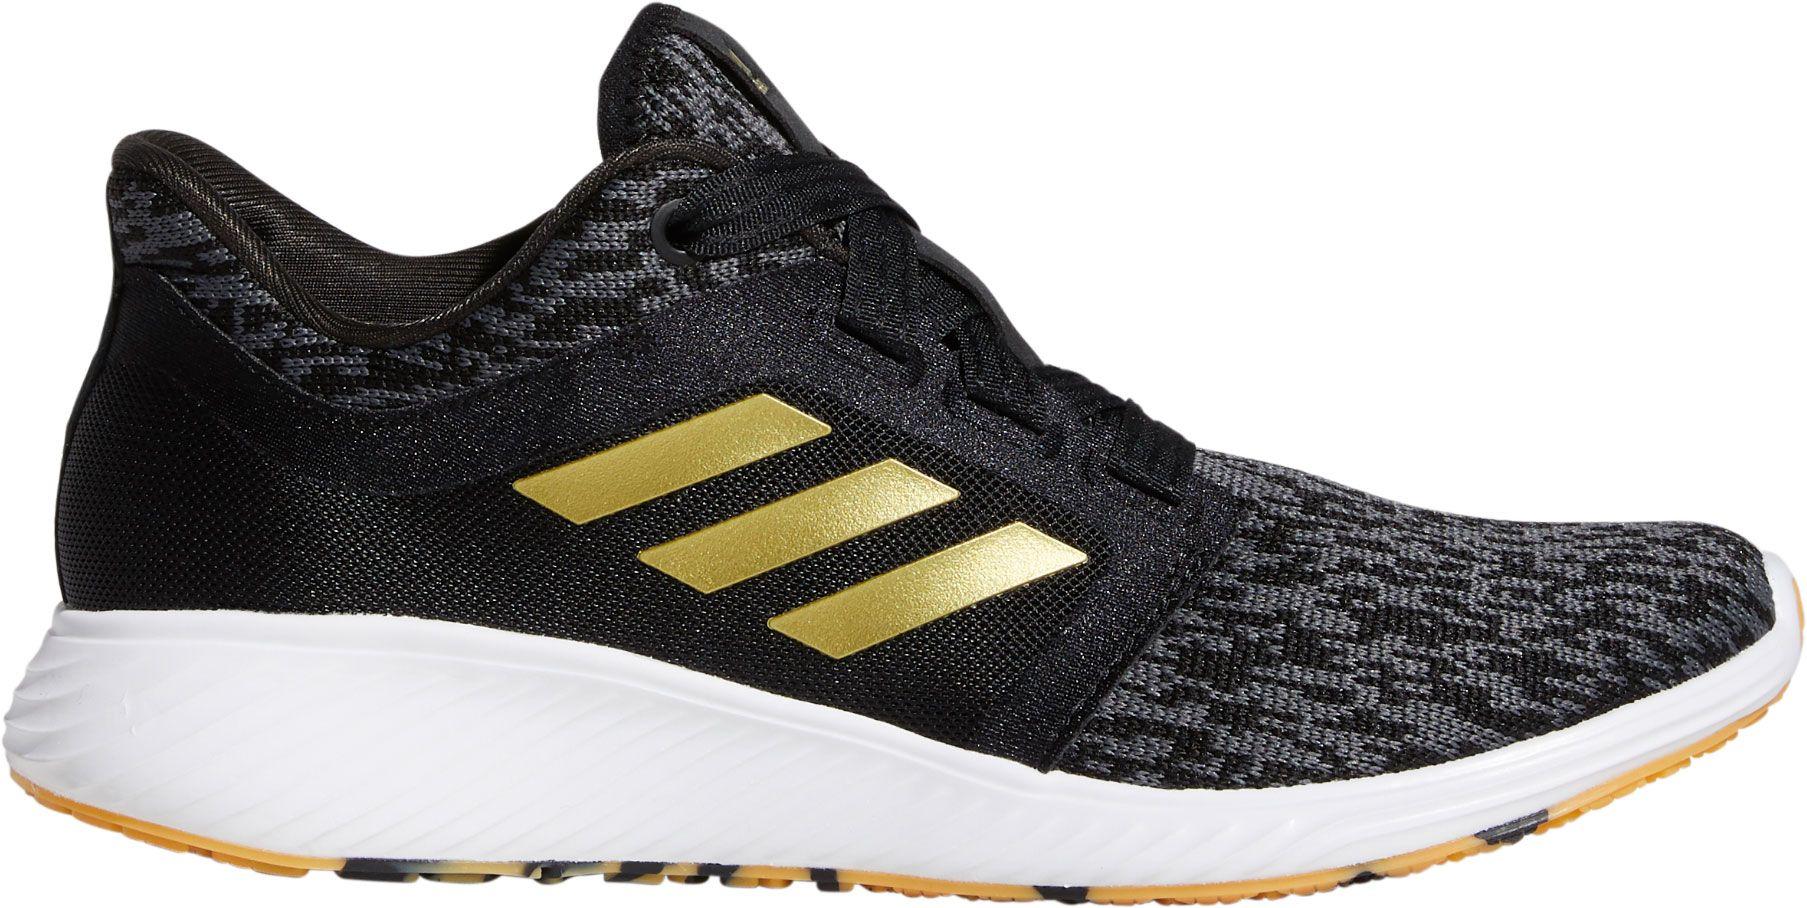 adidas edge lux 3 black and gold